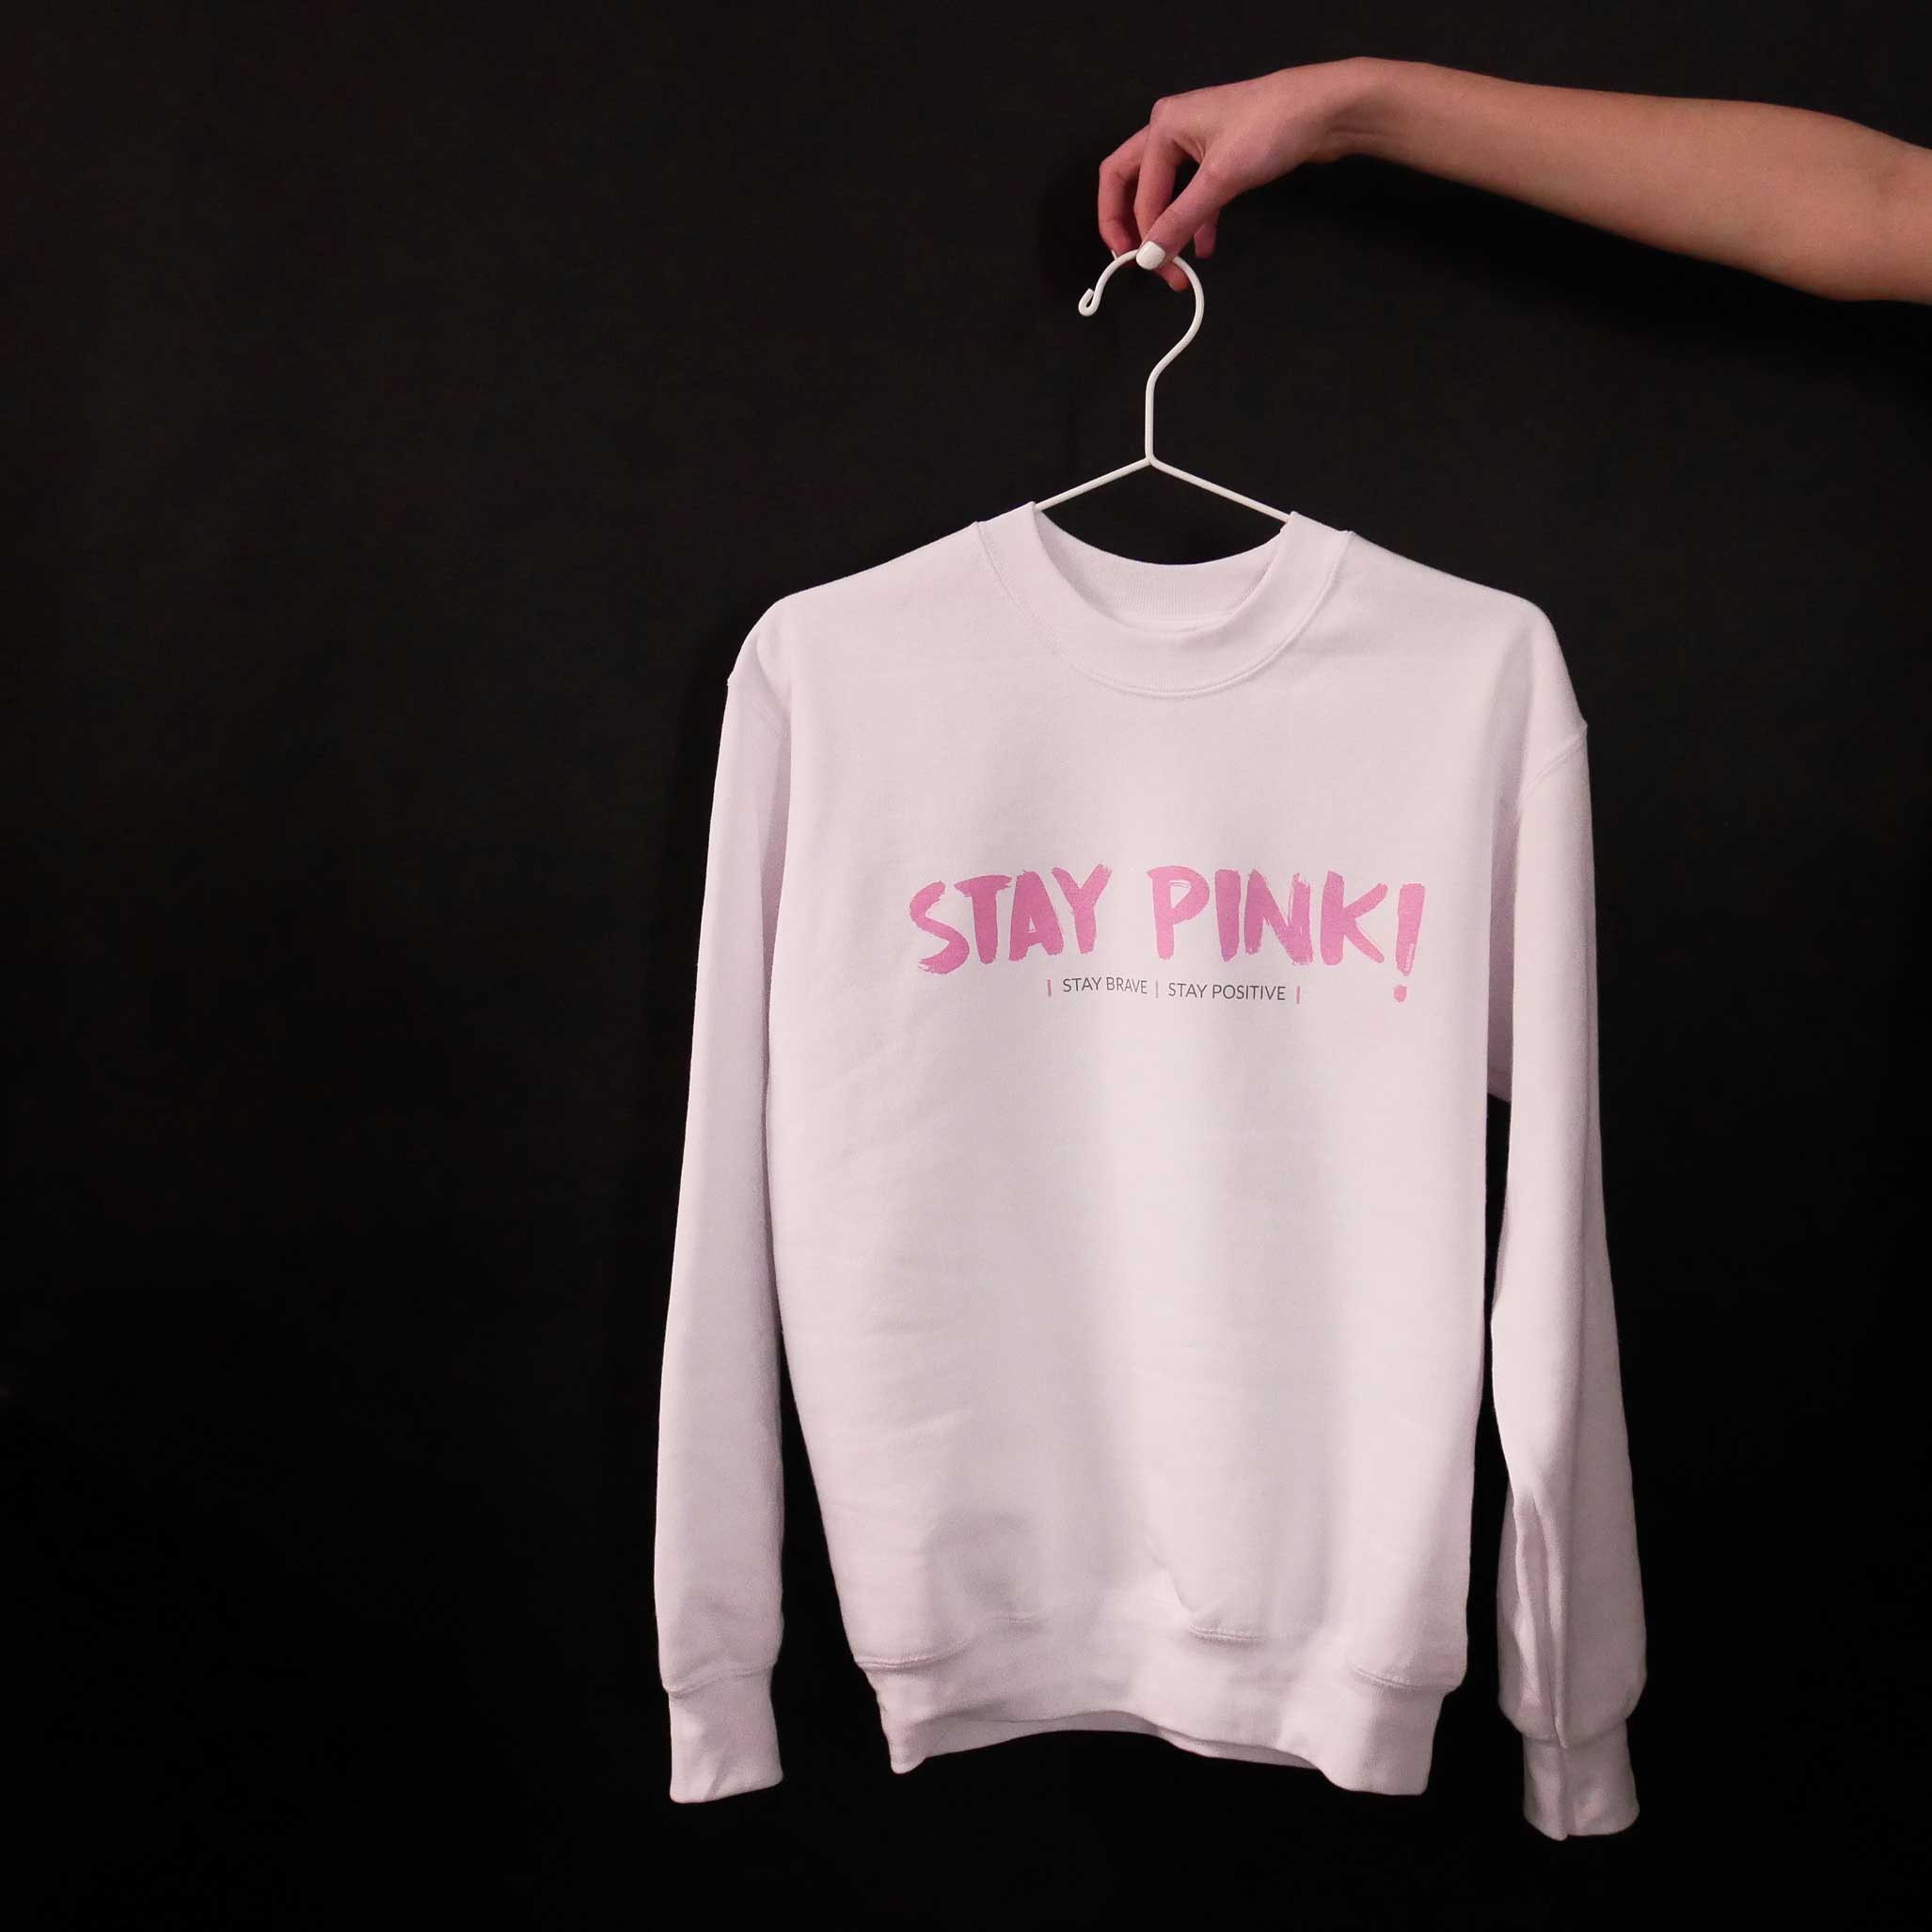 stay-pink-producto-07-1